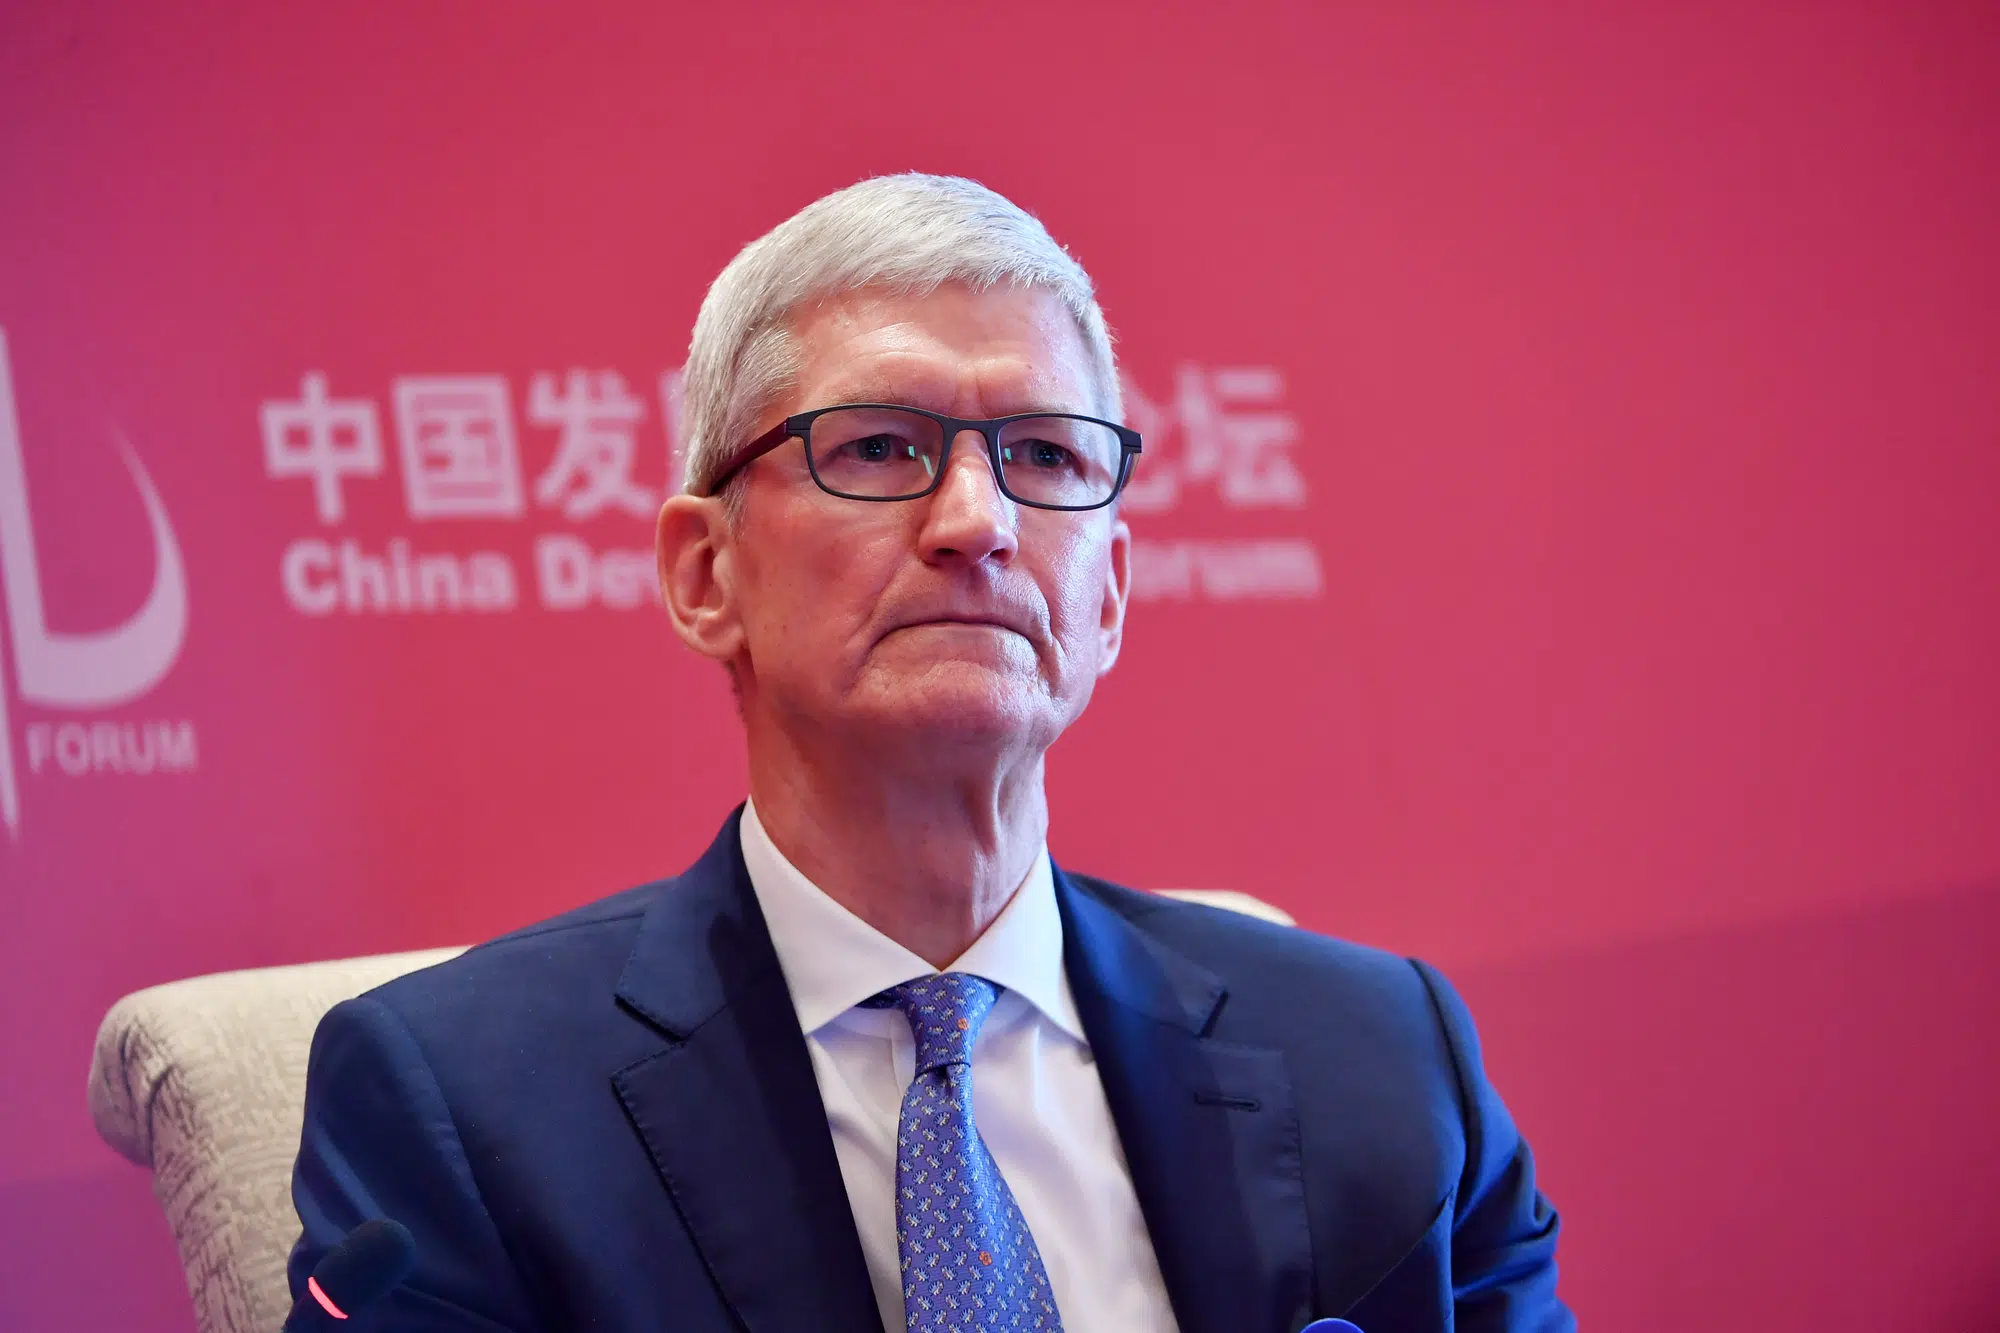 Tim Cook, CEO of Apple Inc., listens during a sub-forum of the the China Development Forum 2018 in Beijing, China, 24 March 2018.  Apple Inc's CEO Tim Cook on Saturday (24 March 2018) called for "calm heads" and more open trade, amid rising concerns over a trade war between China and the United States. Trade tension between the two countries was highlighted this week when U.S. President Donald Trump unveiled plans to slap tariffs on potentially up to $60 billion in imports of Chinese goods.